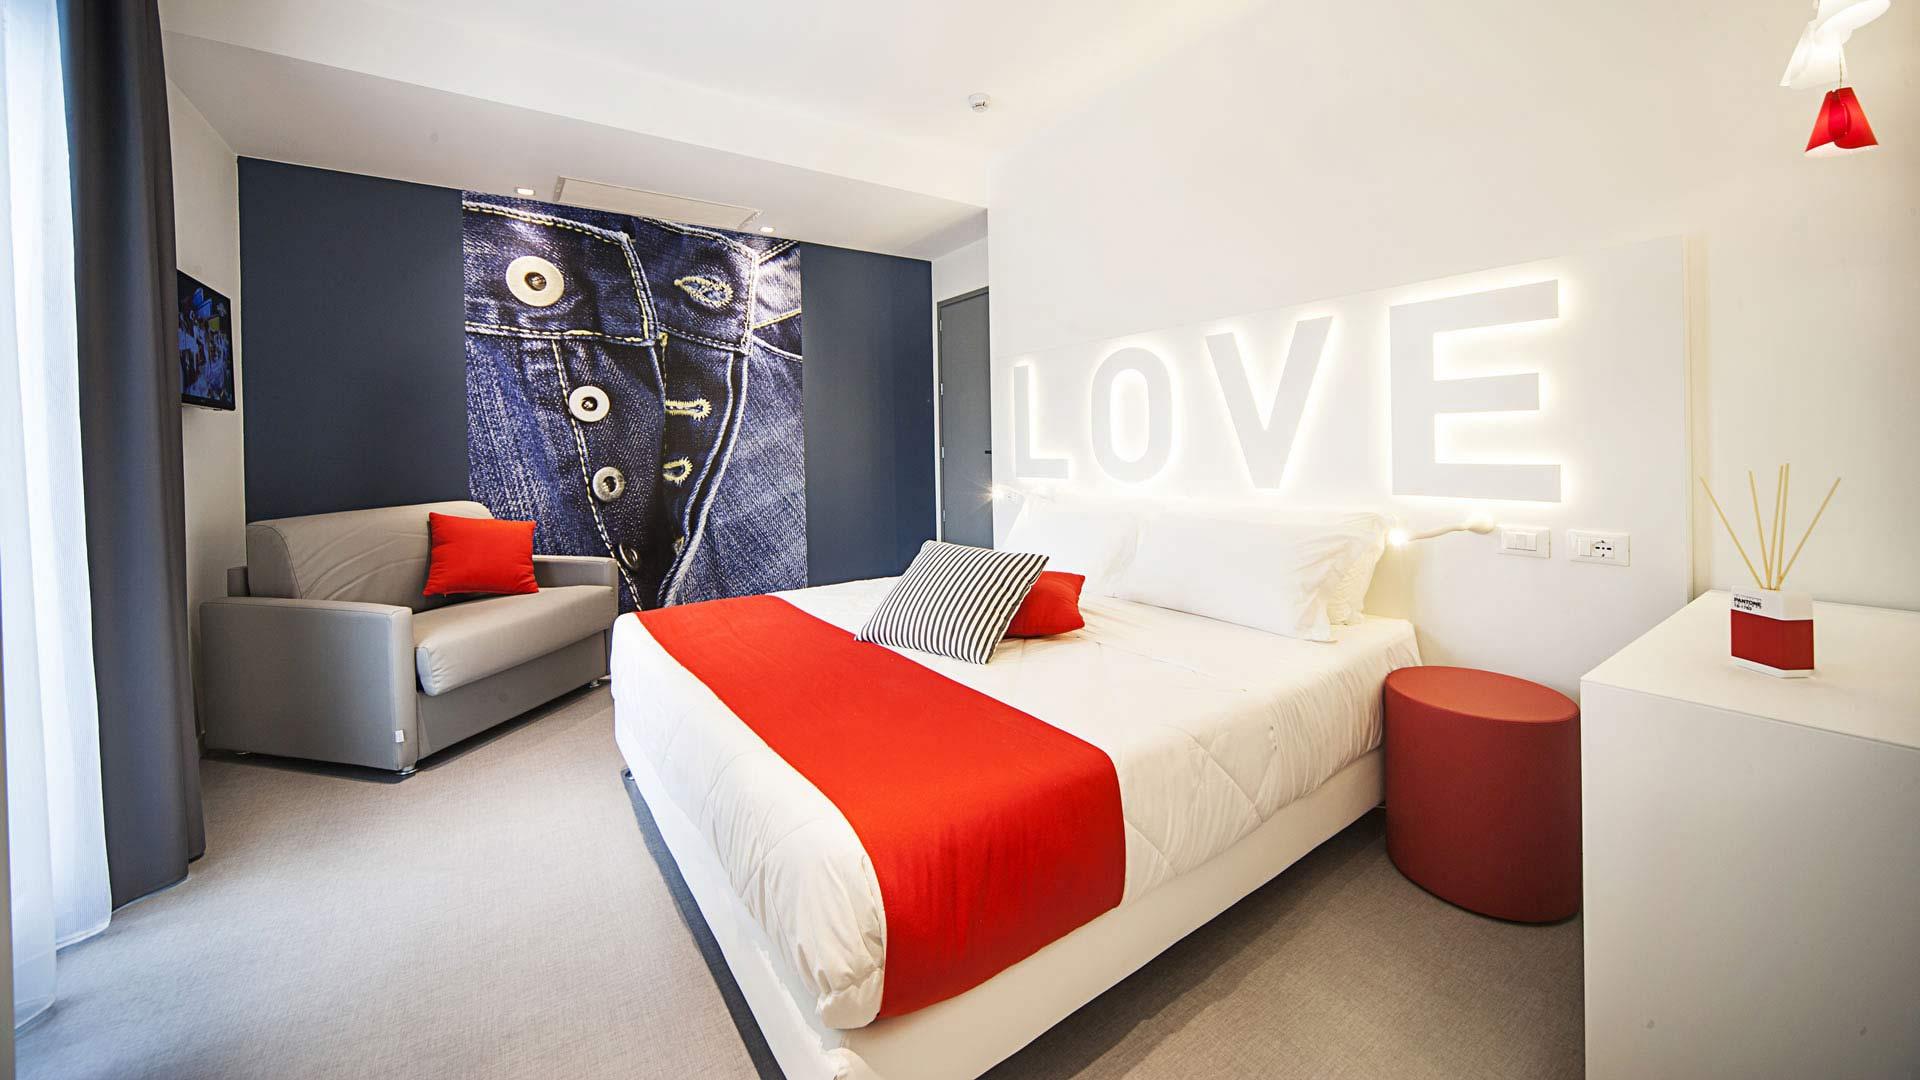 hotelloveboat it camere 012